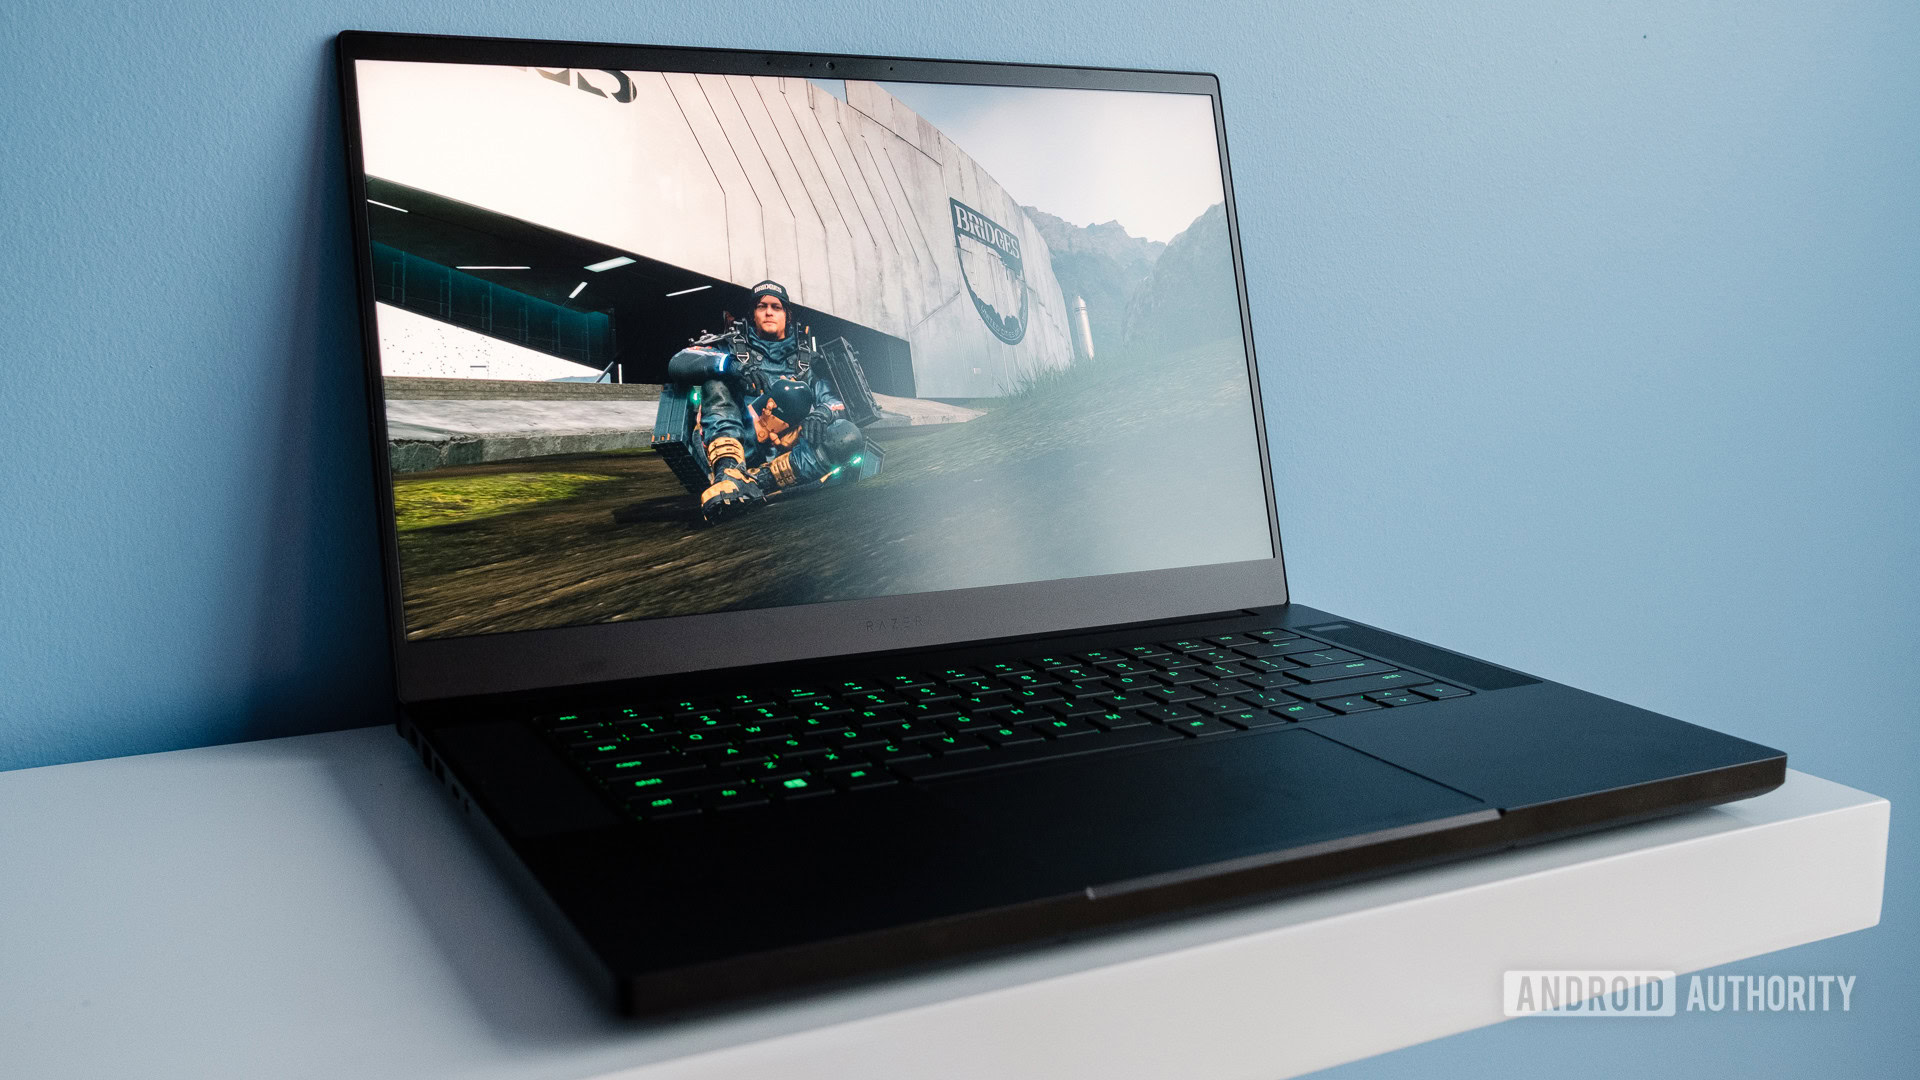 Razer Blade 15 (2021) RTX, right now - Android Authority